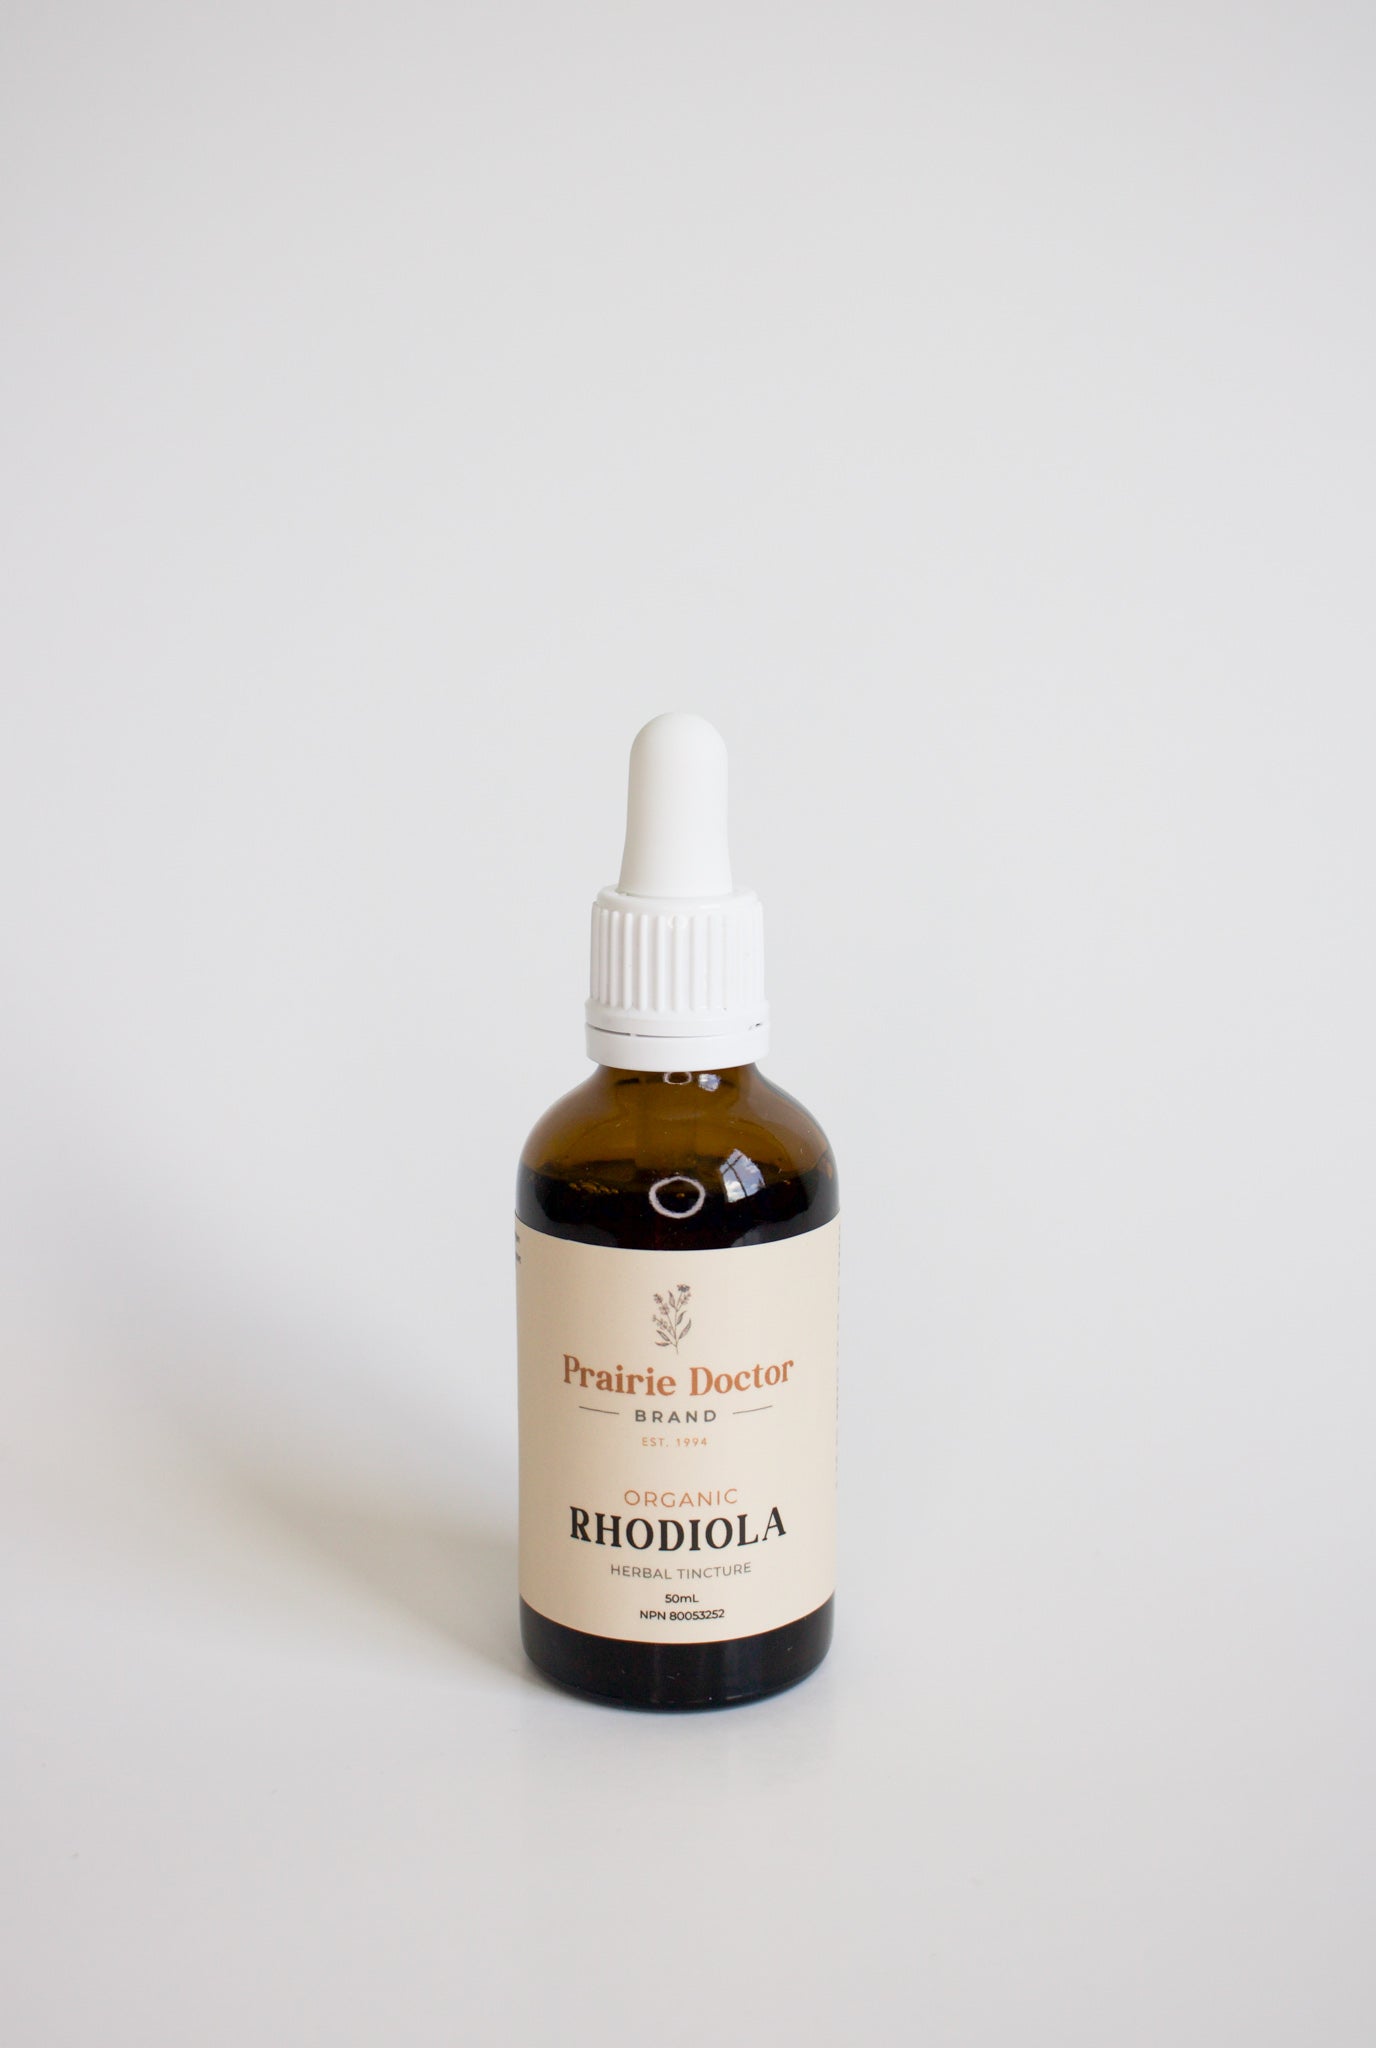 Our Canadian-grown organic Rhodiola herbal tincture has been used in Herbal Medicine as an adaptogen to temporary relieve symptoms of stress such as mental fatigue and sensation of weakness.